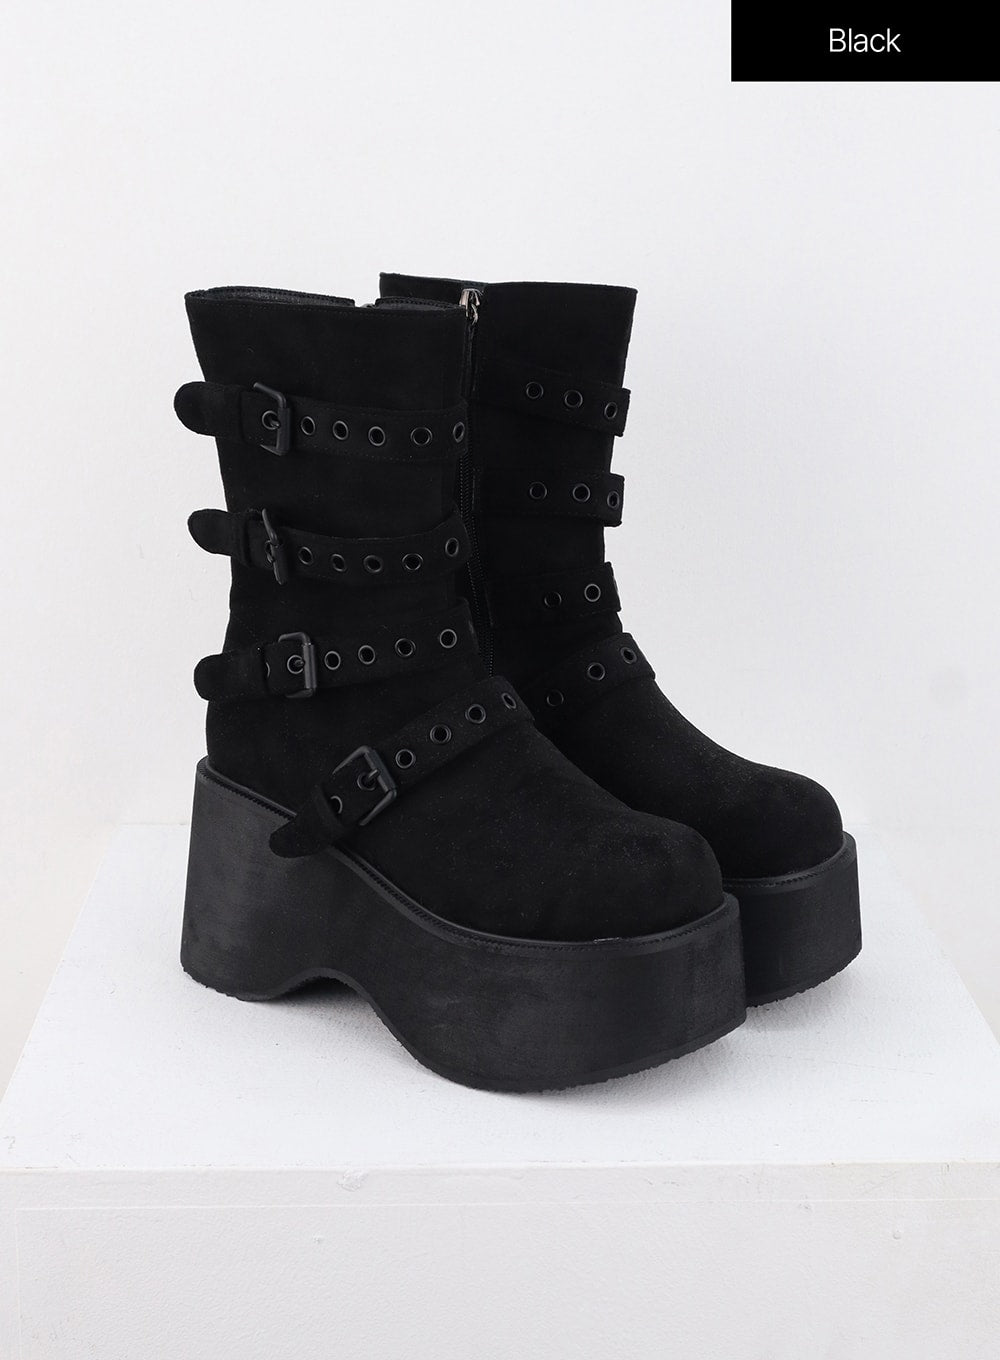 buckle-faux-leather-mid-boots-is327 / Black